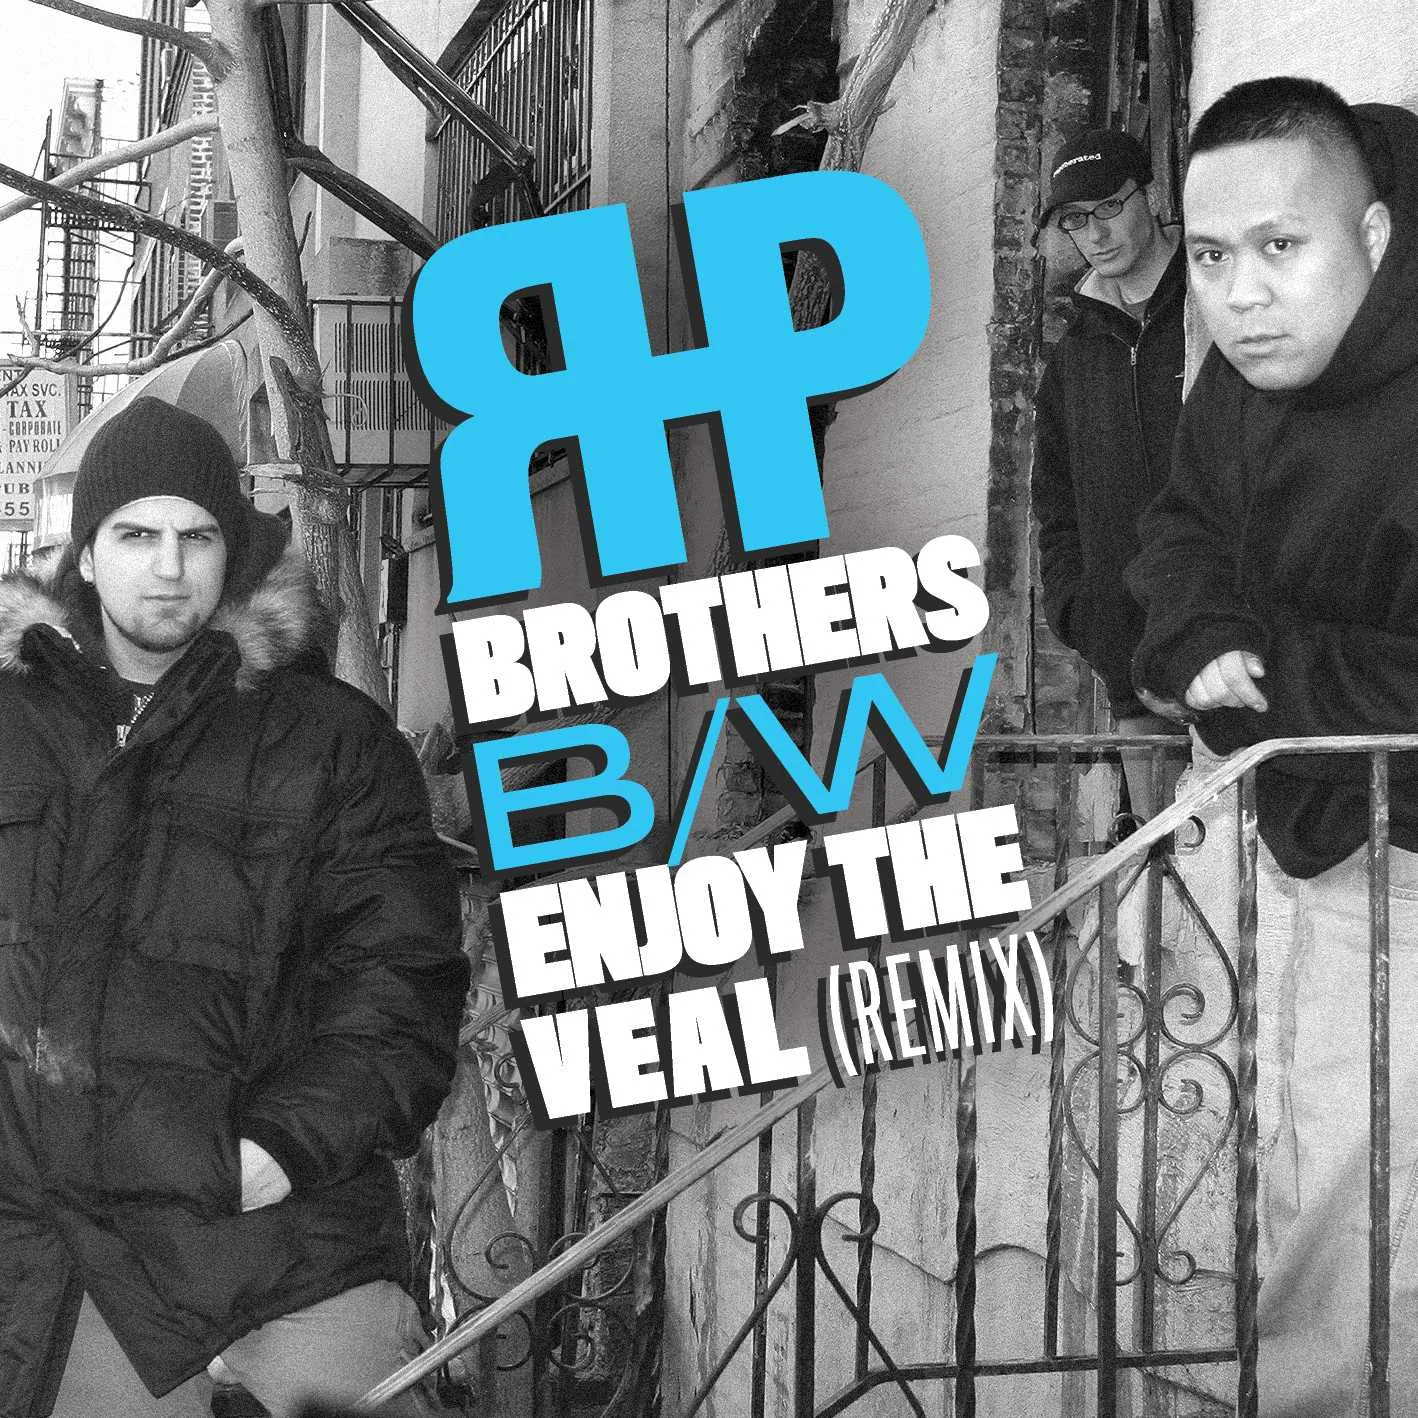 Album cover for “Brothers B/W Enjoy The Veal (Remix)” by Regenerated Headpiece